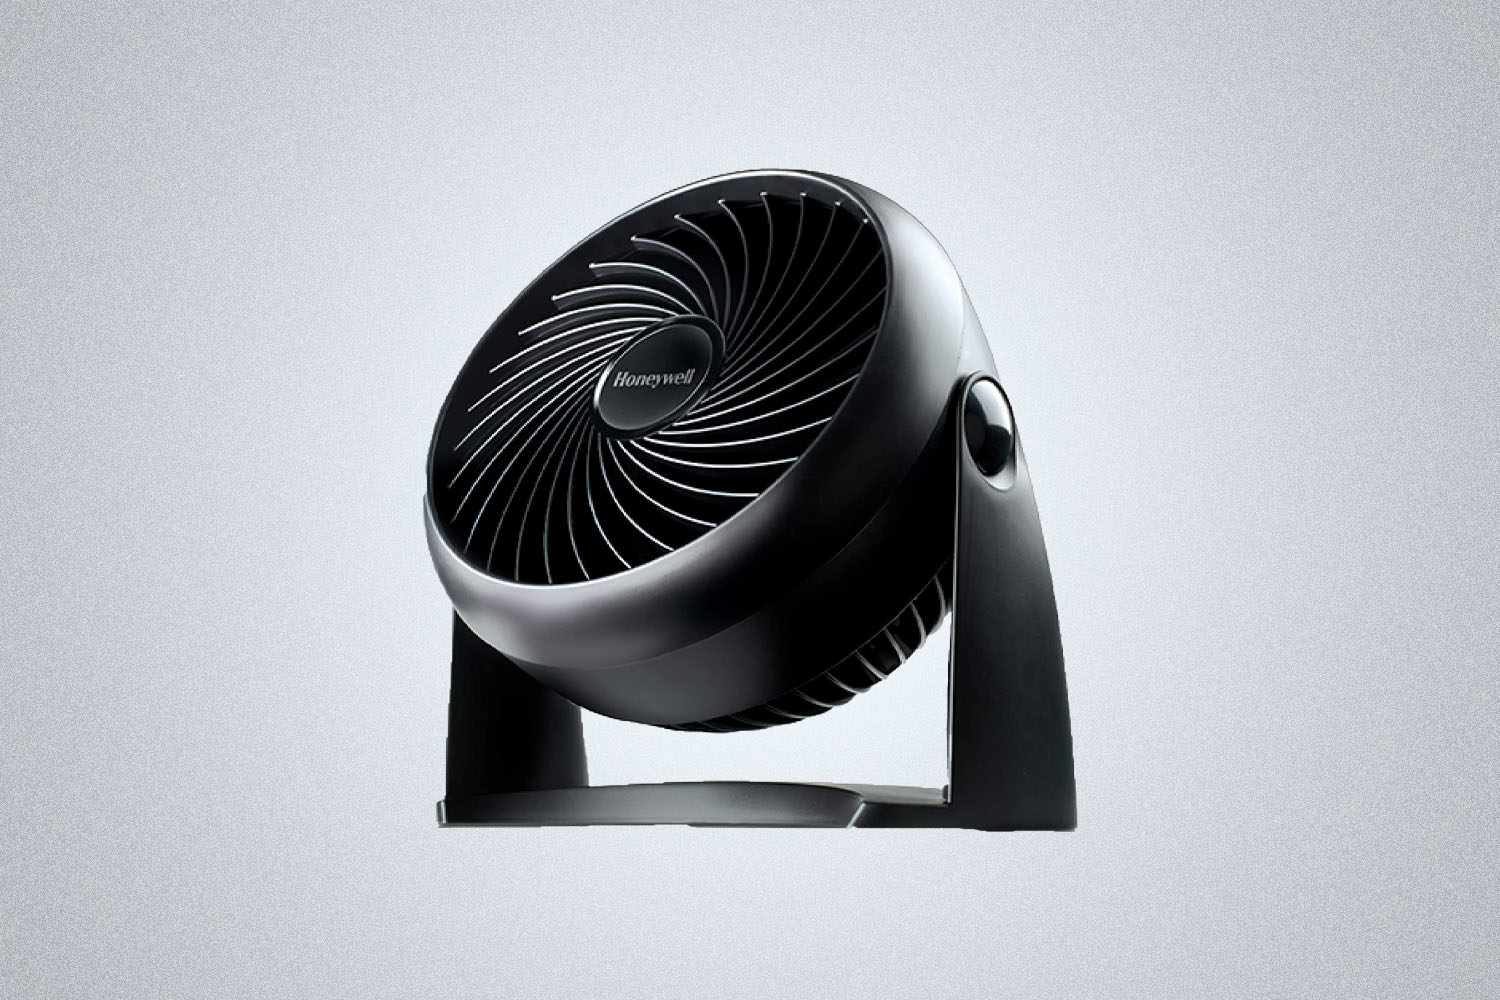 The Honeywell TurboForce Fan is a great product for falling asleep in 2022